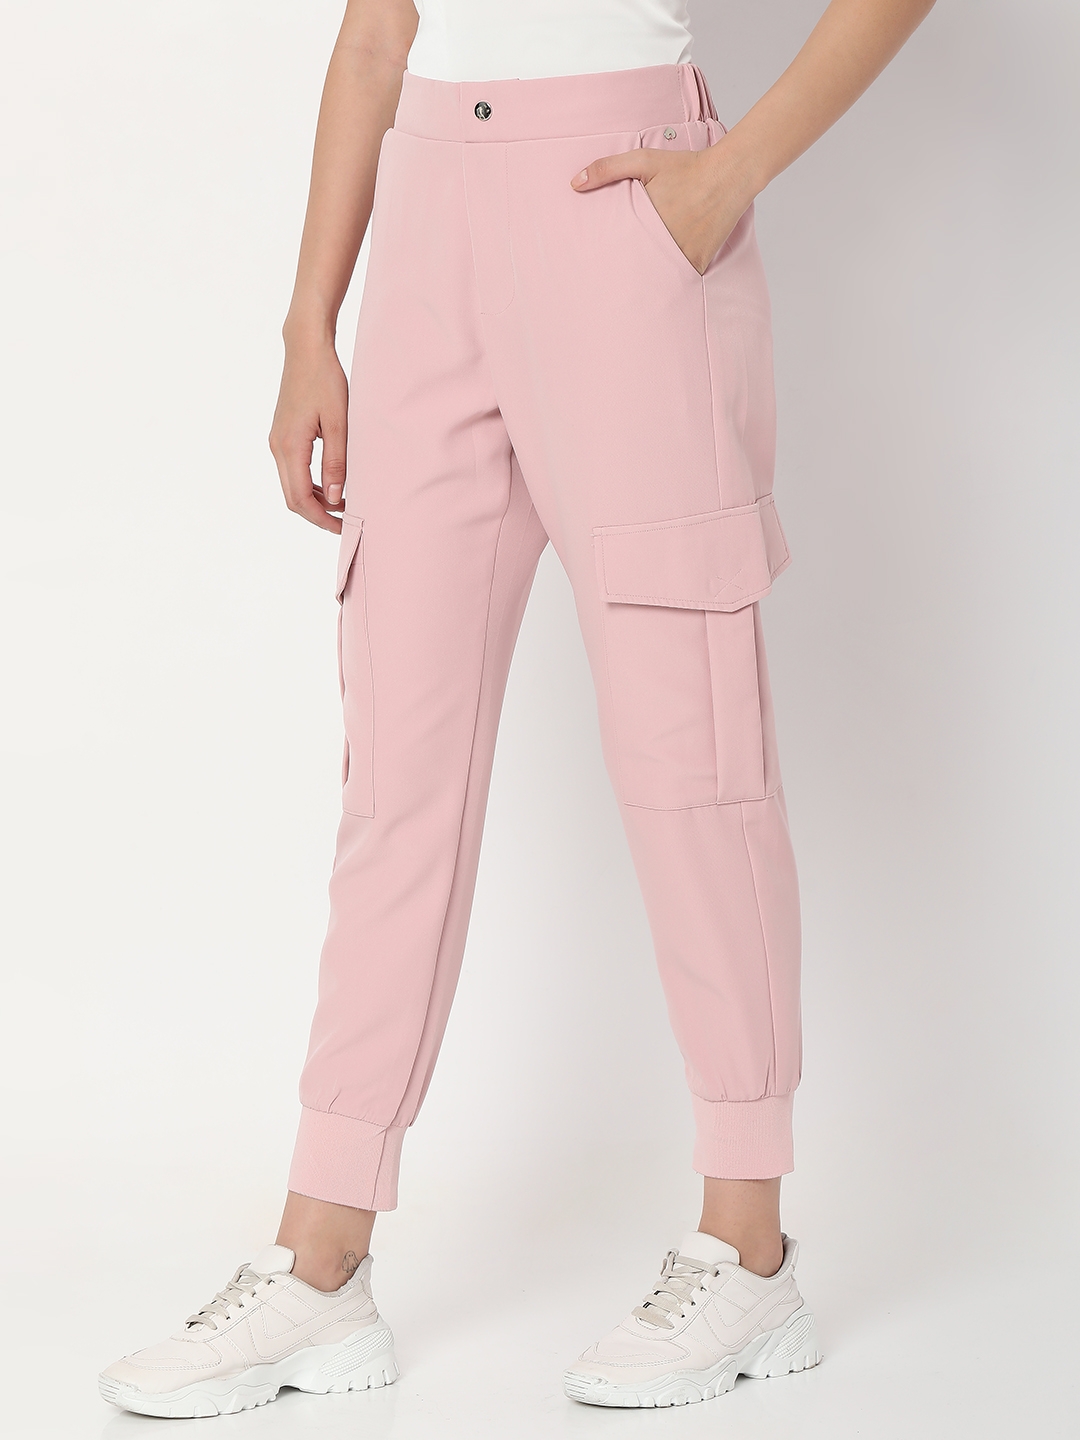 spykar | Women's Pink Cotton Solid Trackpants 1